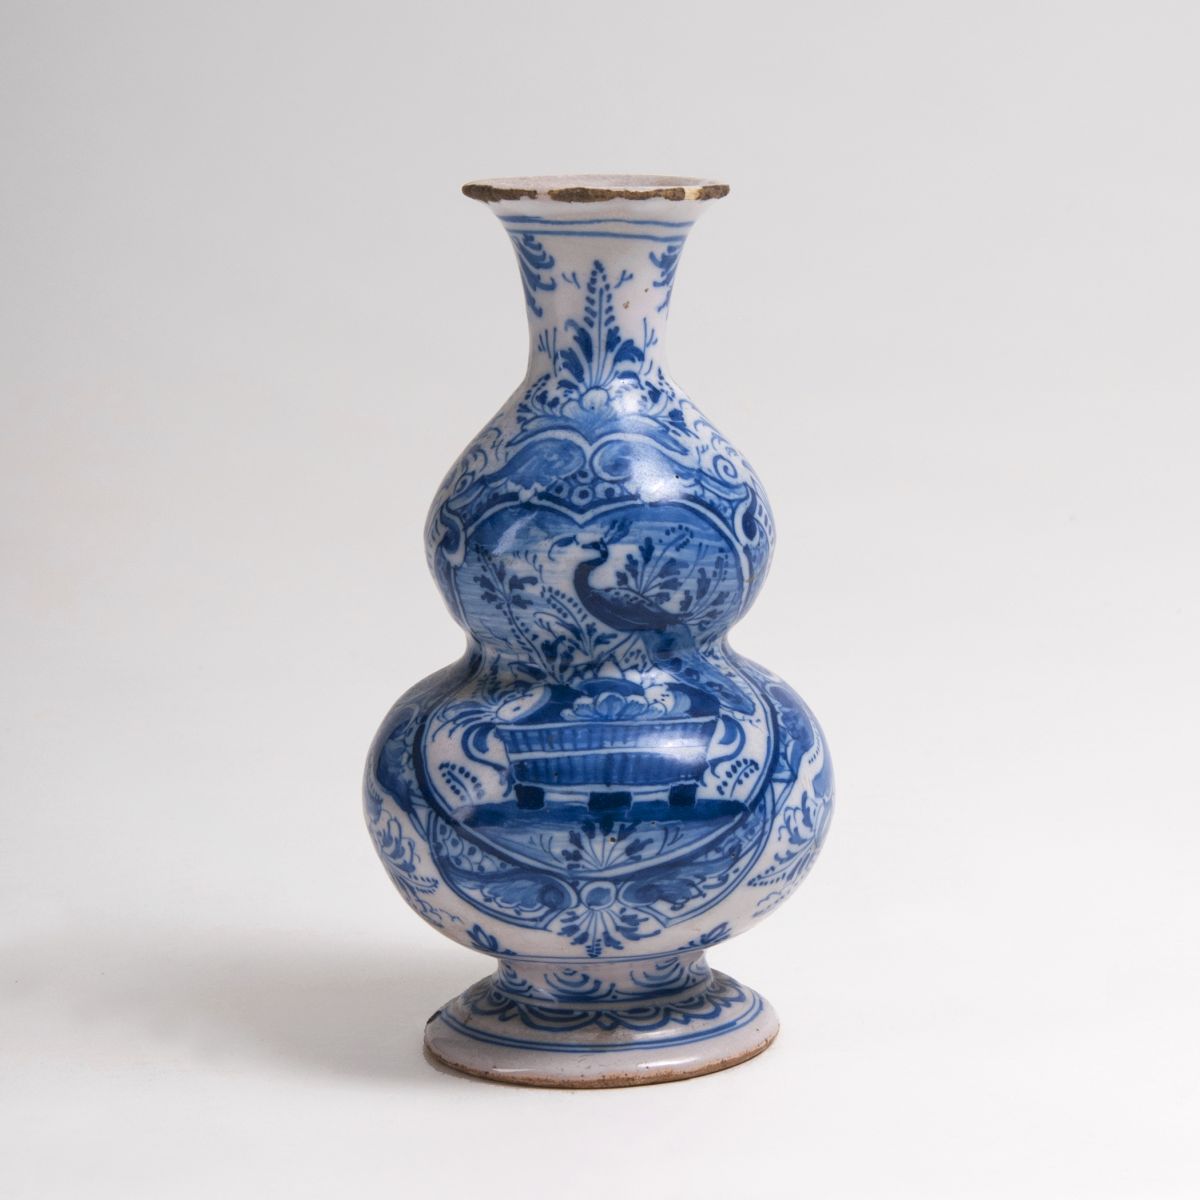 A faience double-gourd vase with blue painting